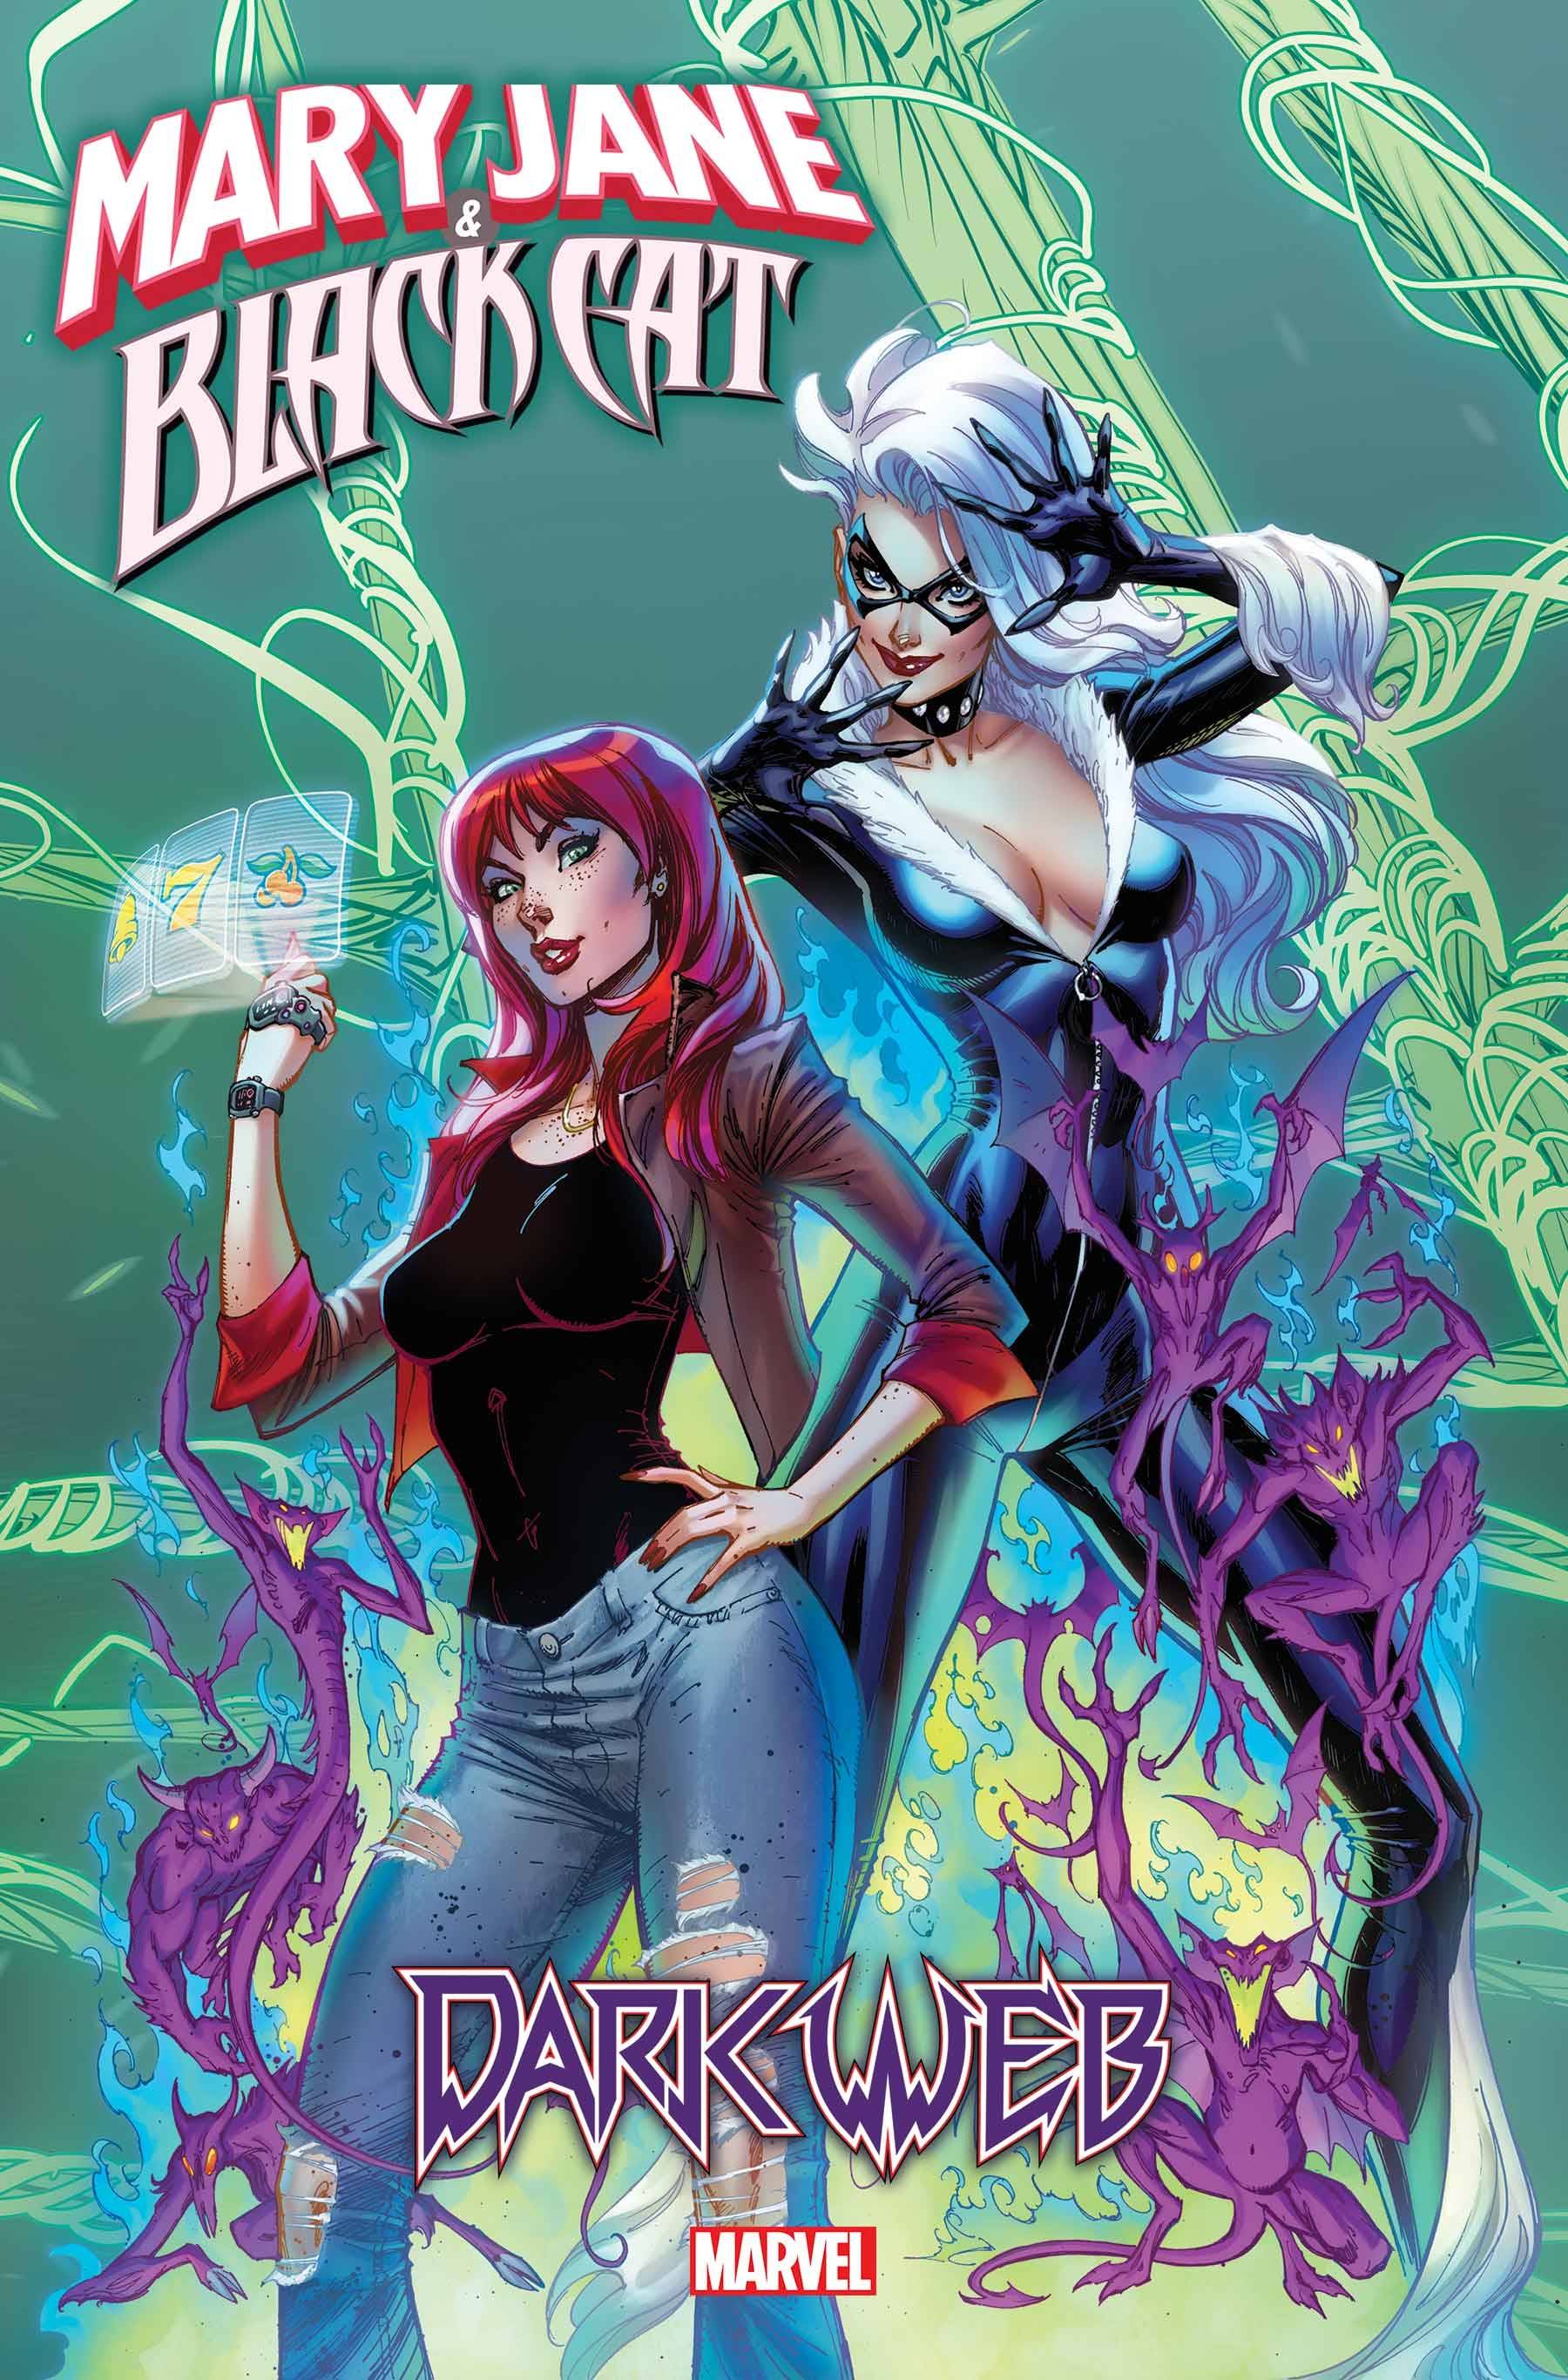 12/21/2022 MARY JANE AND BLACK CAT #1 (OF 5)